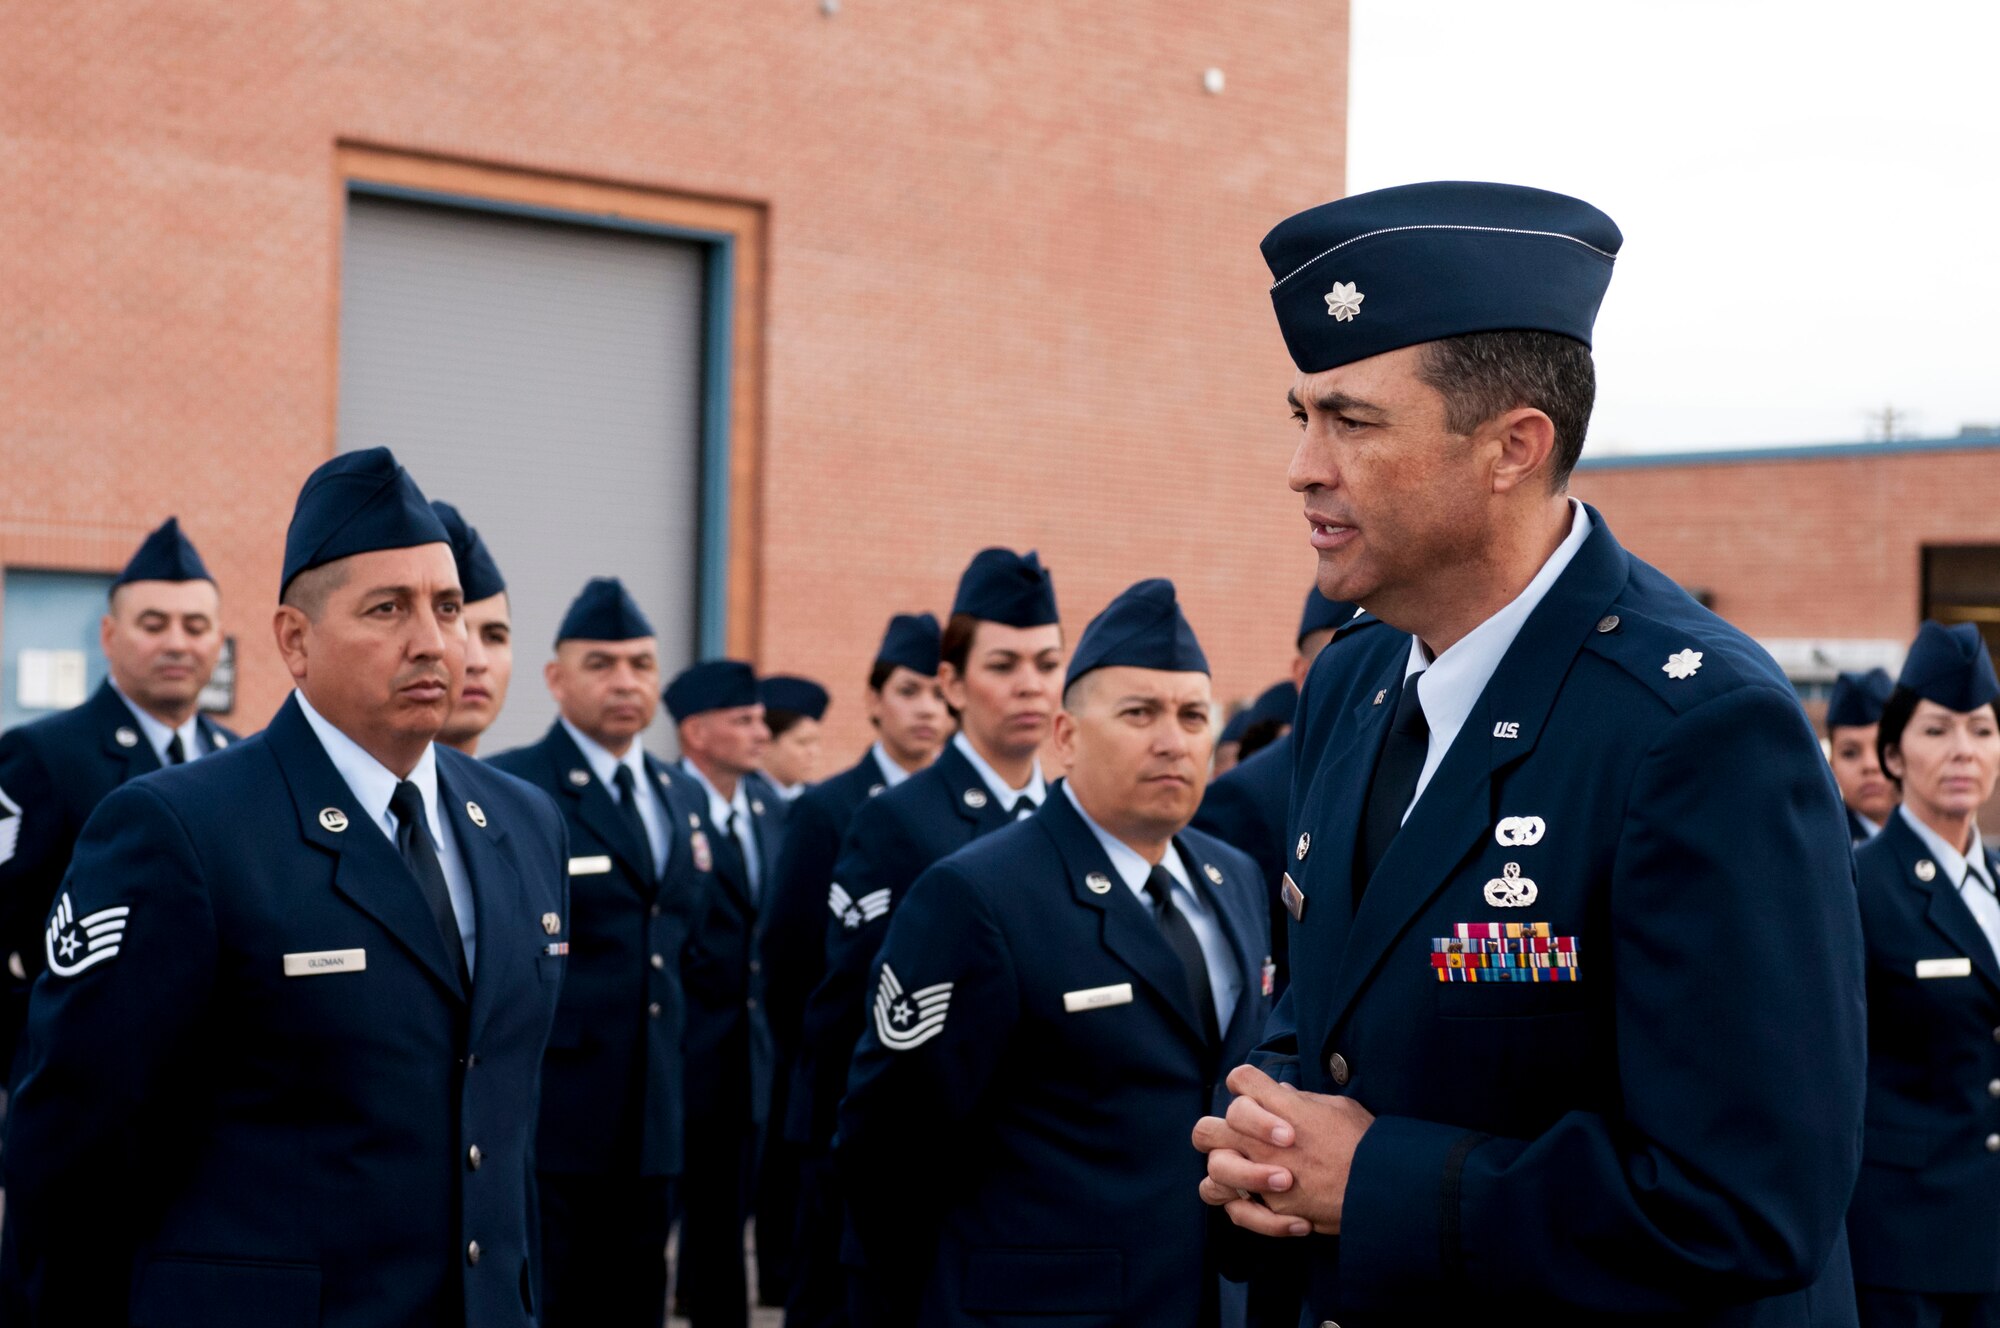 Lt. Col. Fausto Padilla, 162nd Logistics Readiness Squadron commander, confers with Airmen after a successful open ranks inspection on Nov. 2 at the Tucson International Airport. More than 70 Airmen assembled near building 6 in their dress blues, where Senior Master Sgt. Daniel Ramirez inspected the crew for hygiene and uniform appearance while ensuring their medals and uniforms were in line with military personnel flight records. (U.S. Air National Guard photo by Tech. Sgt. Hollie A. Hansen/Released)